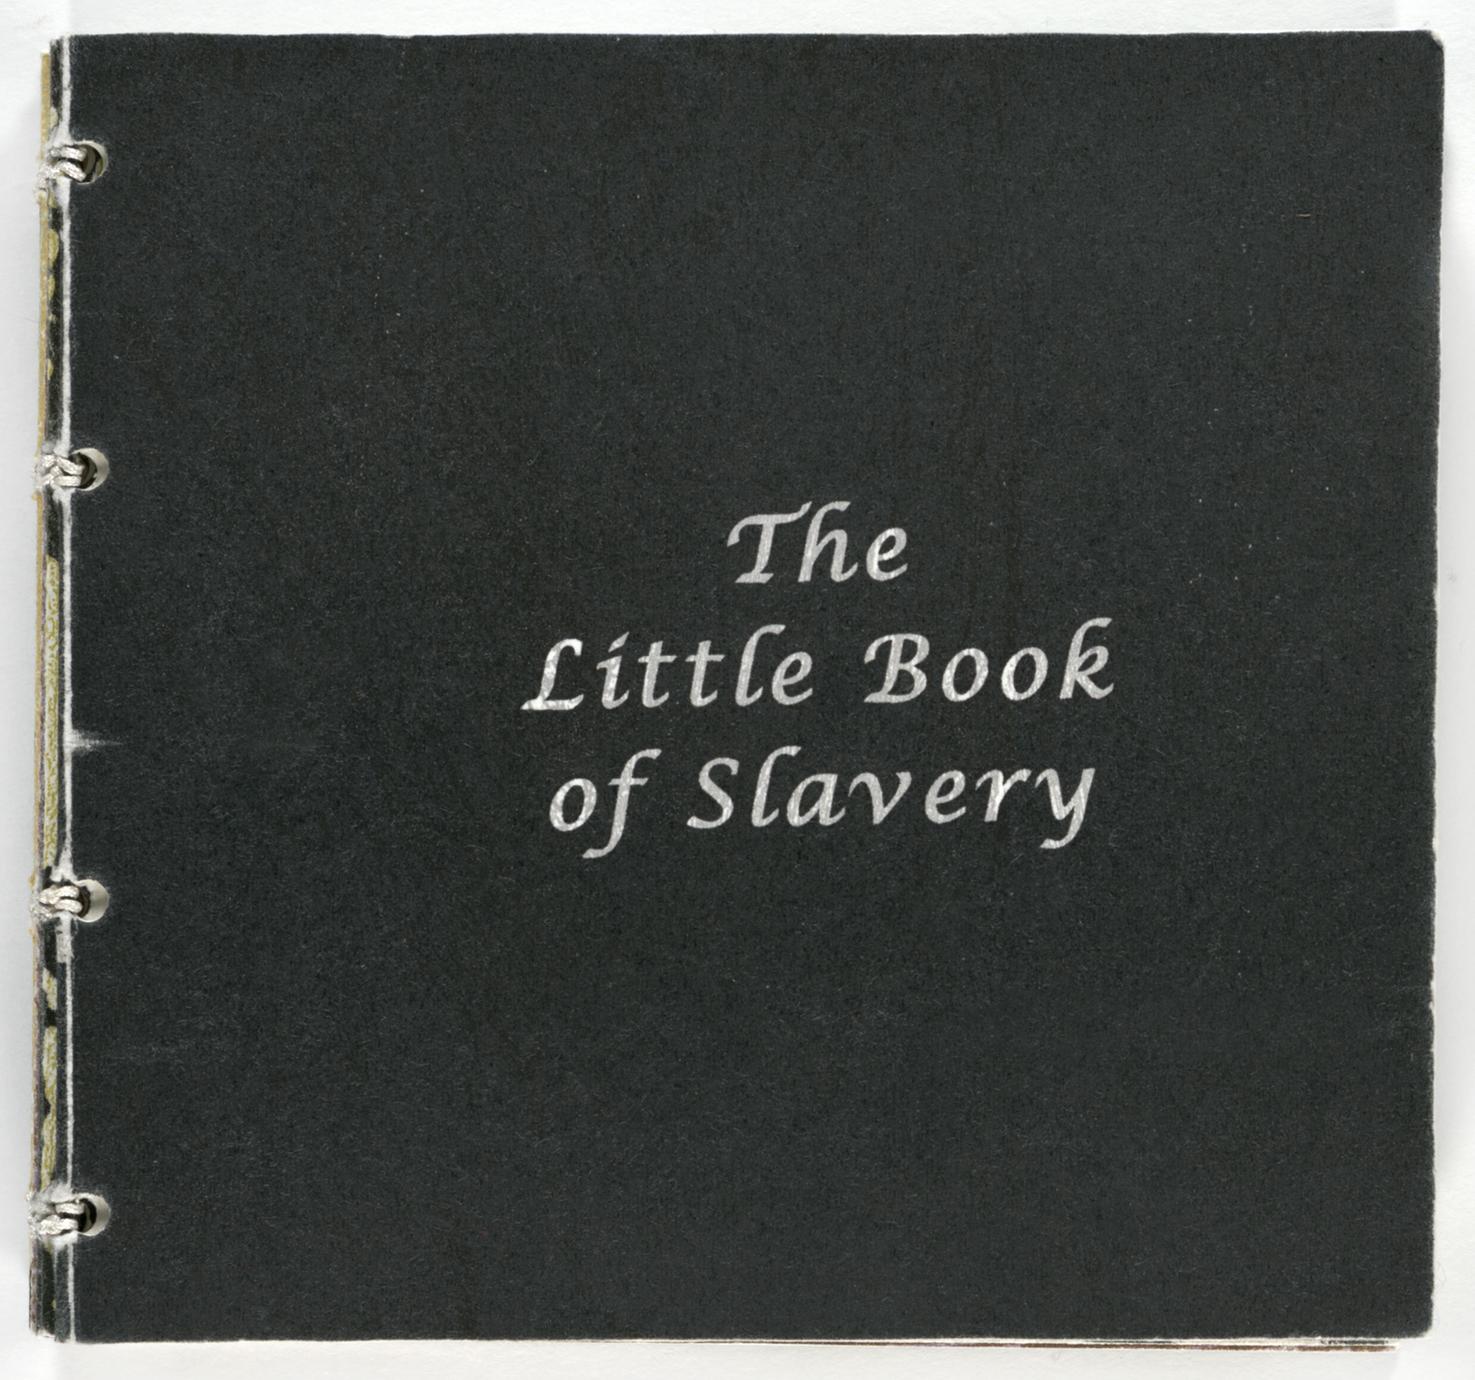 The little book of slavery (1 of 3)